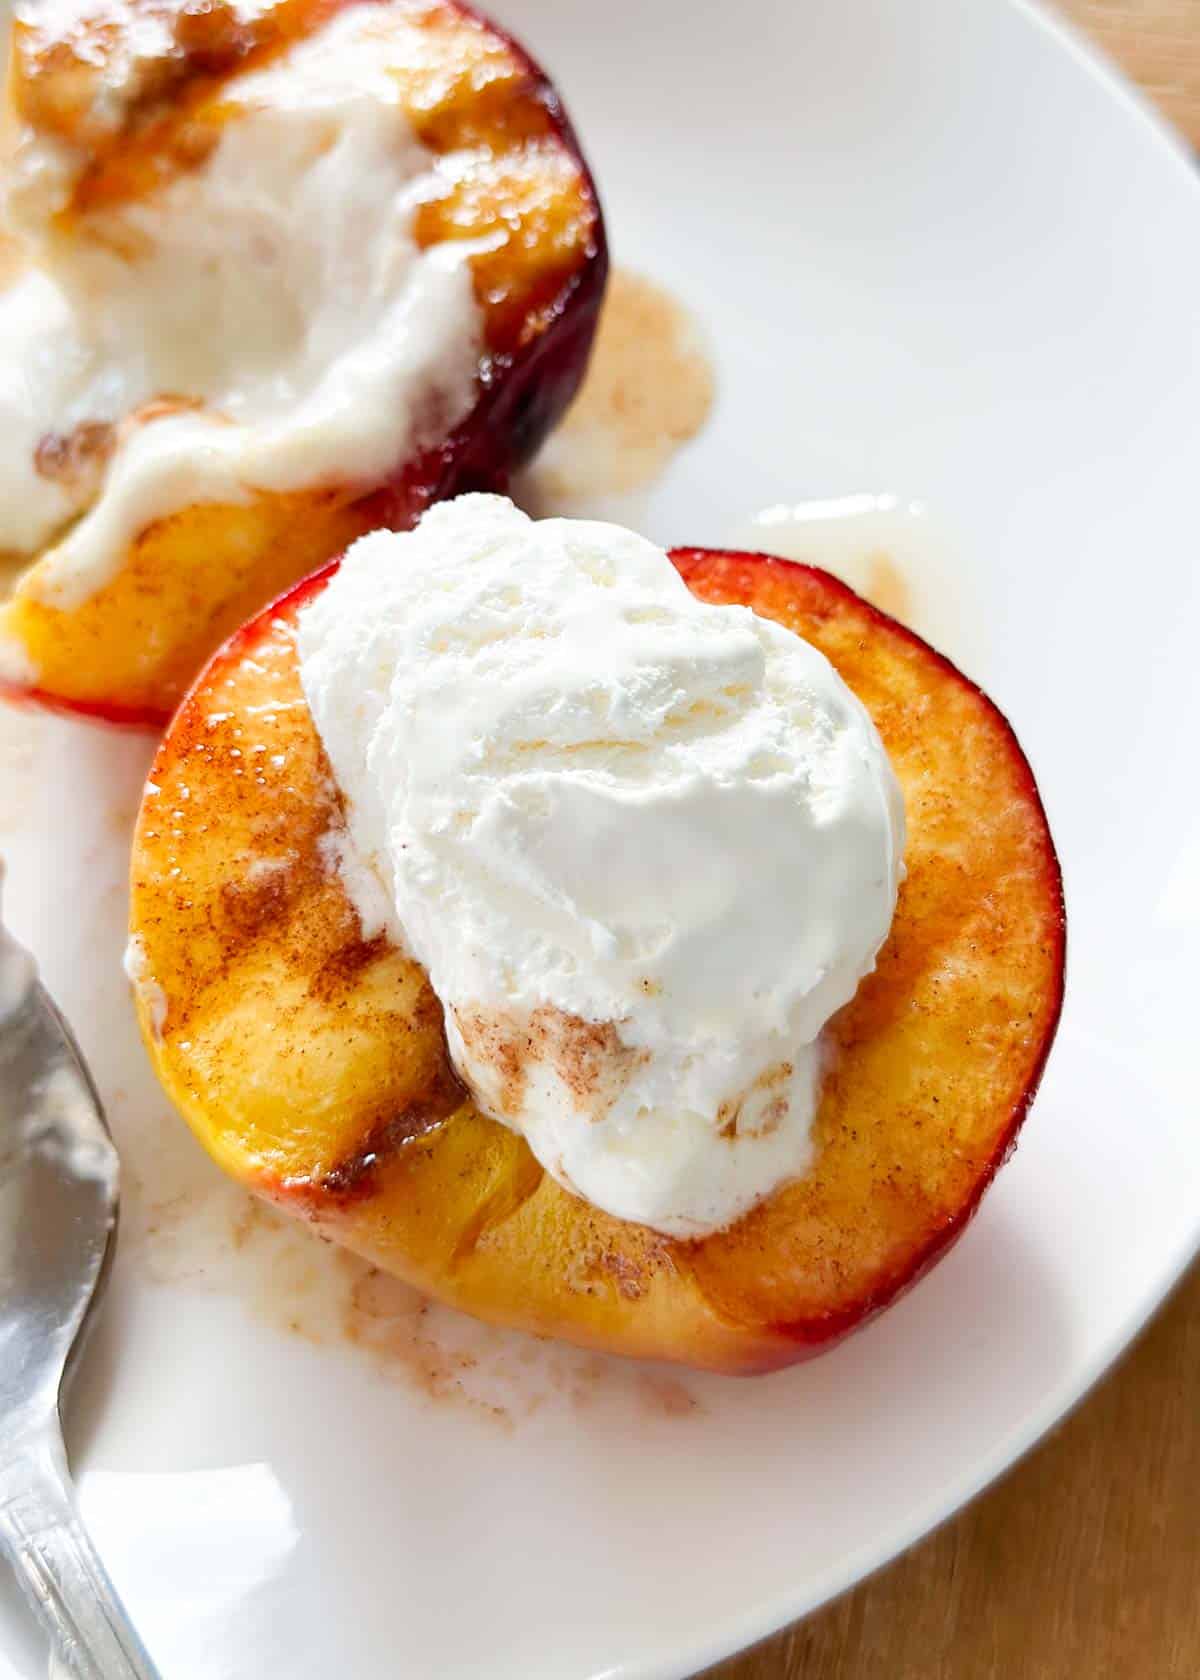 Grilled peaches on a plate with whipped cream.